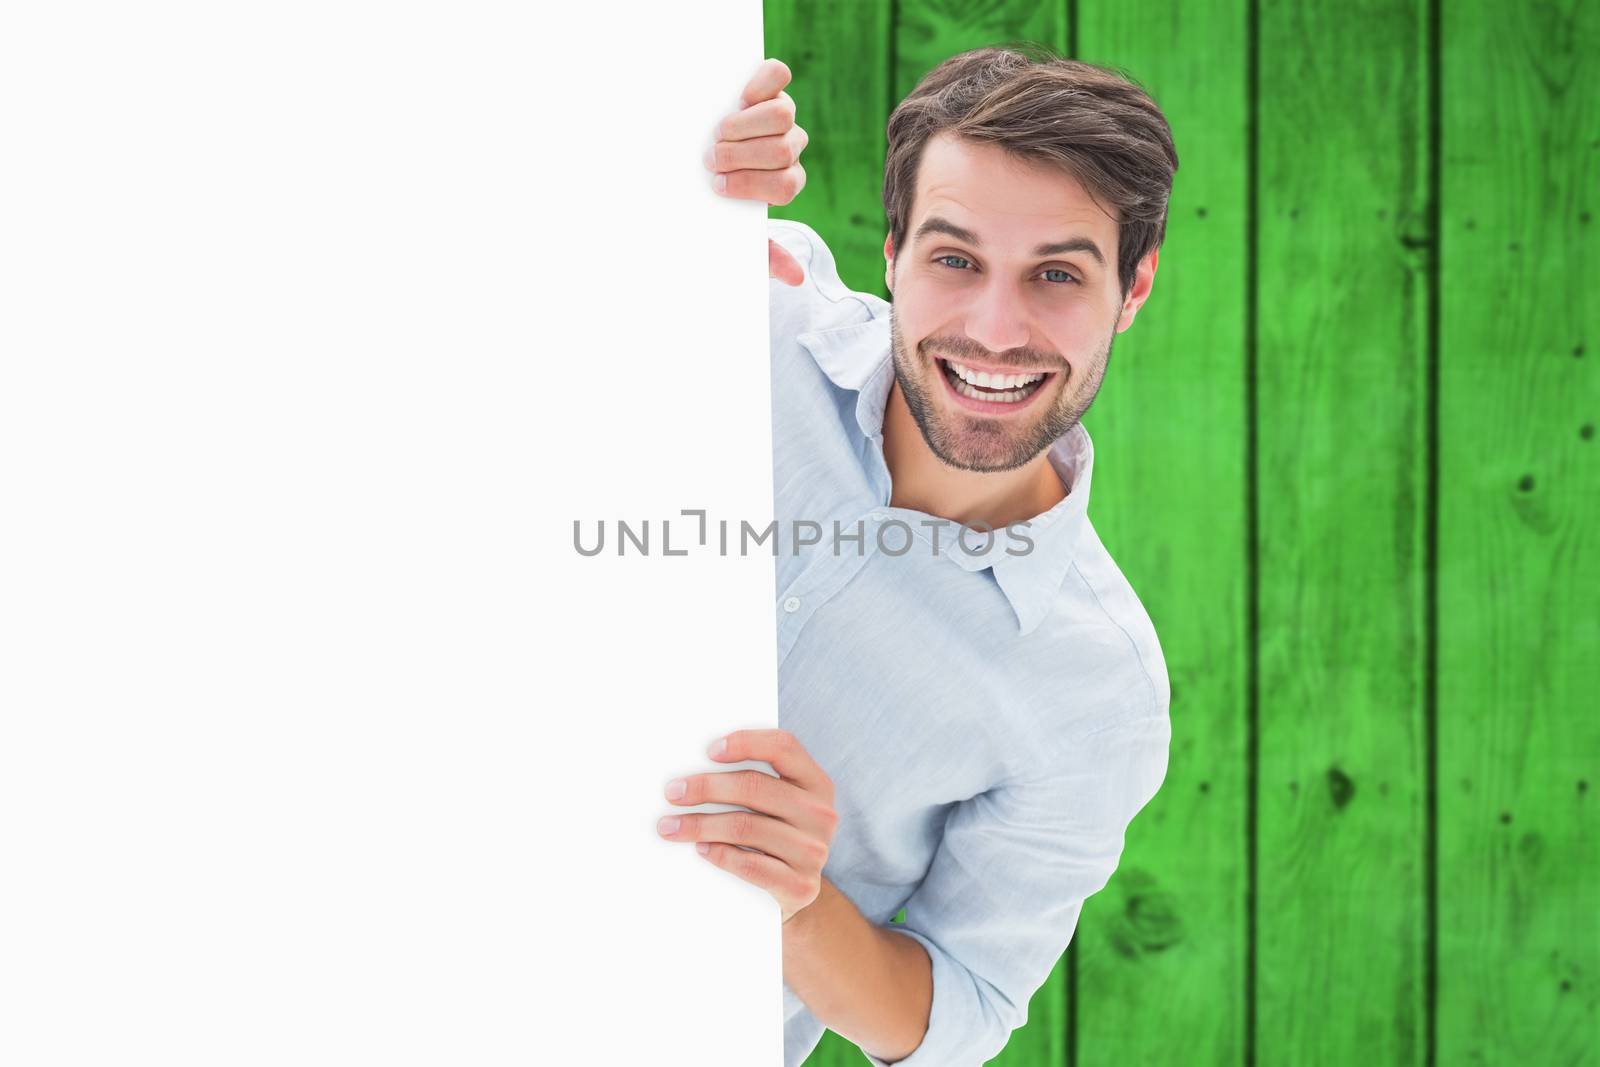 Attractive young man smiling and holding poster against bright green wooden planks